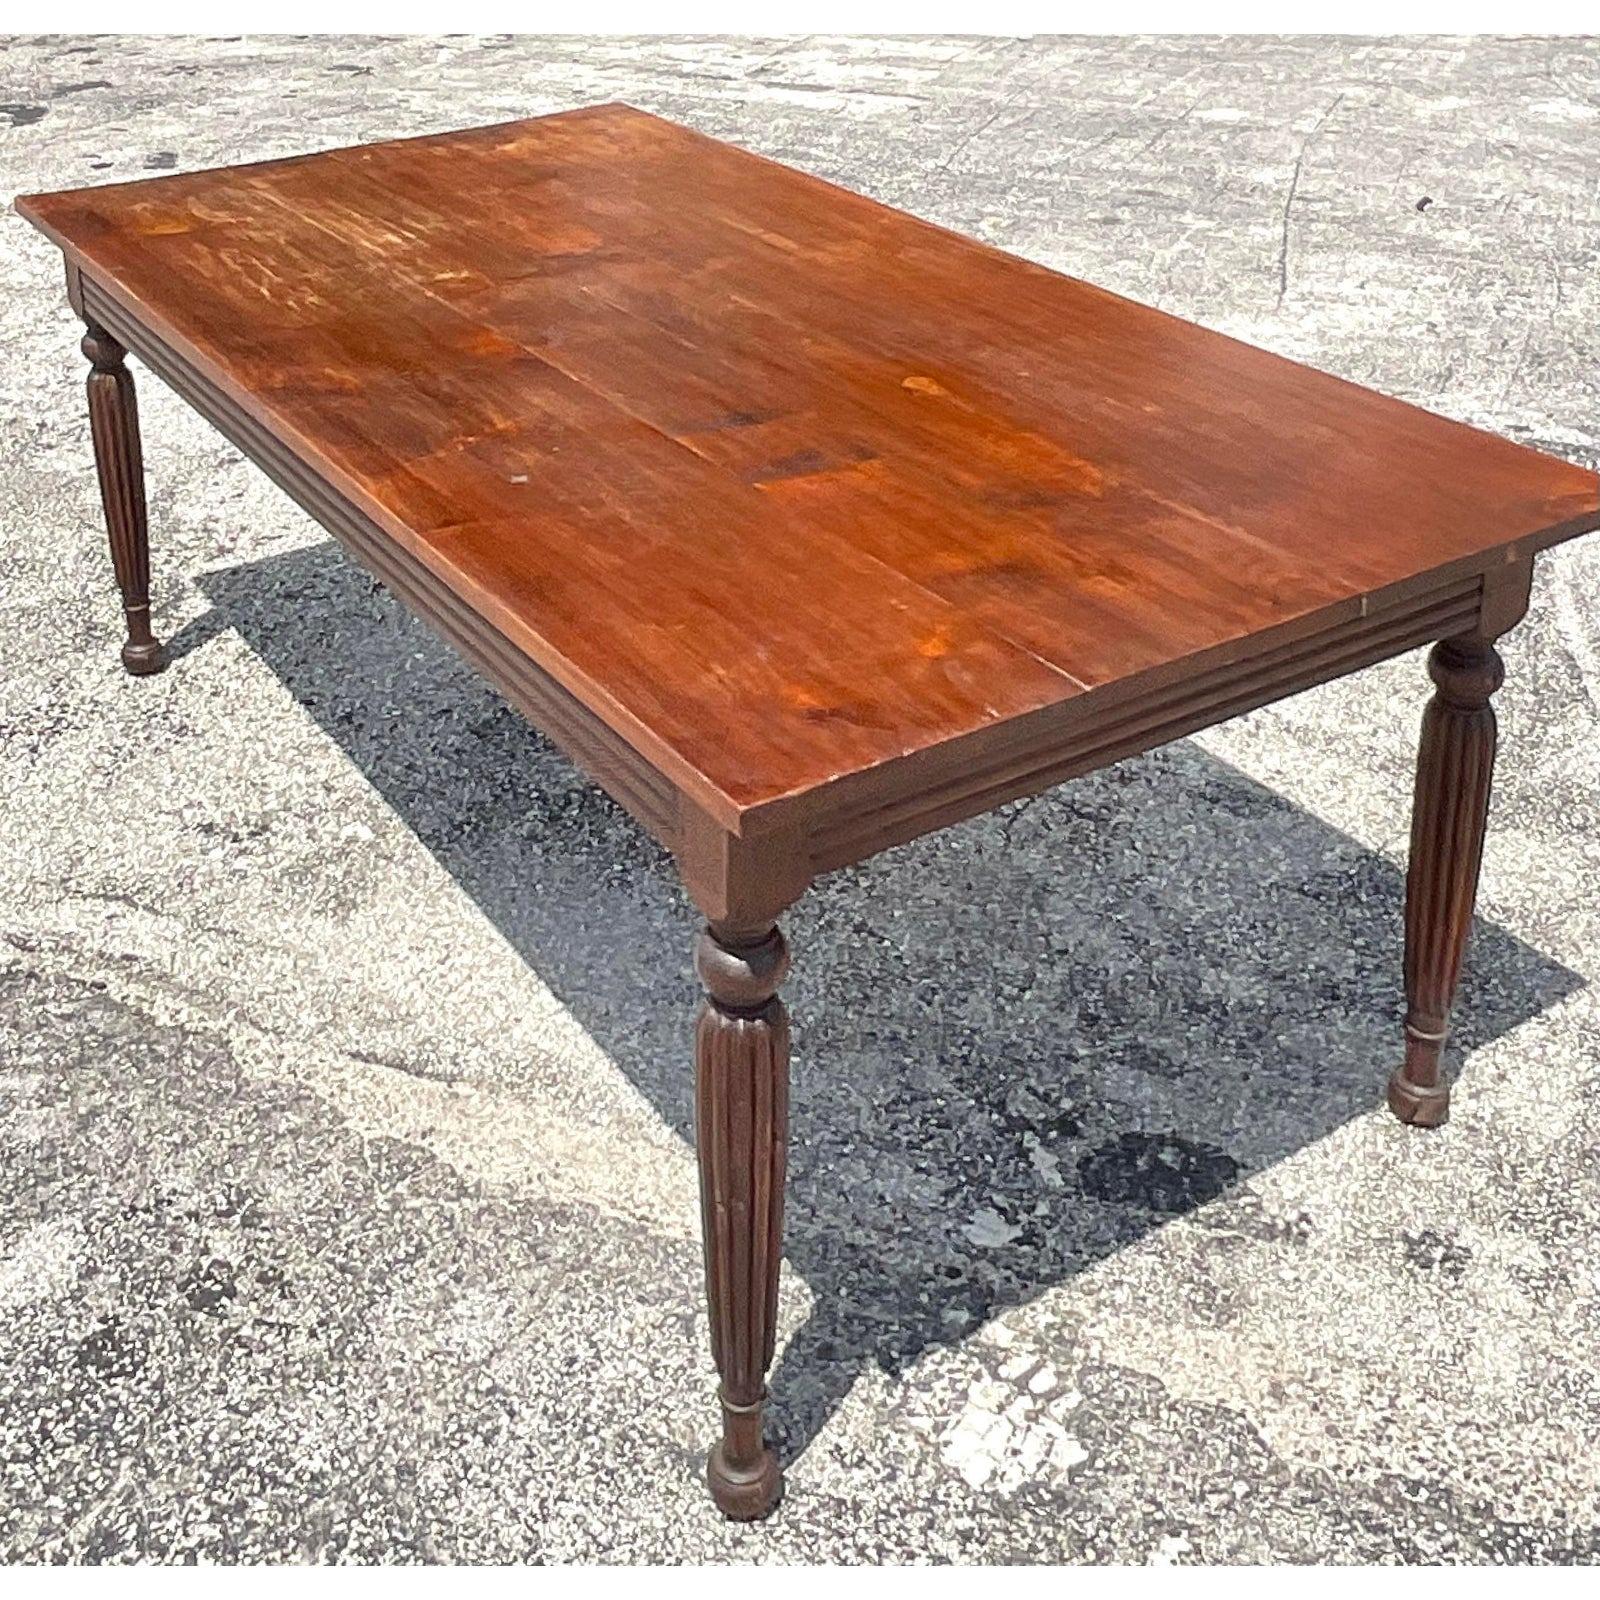 A fabulous vintage Boho dining table. A chic farm table with a beautiful patinated finish. Made of a solid walnut with carved details in the apron and legs. Acquired from a Palm Beach estate.